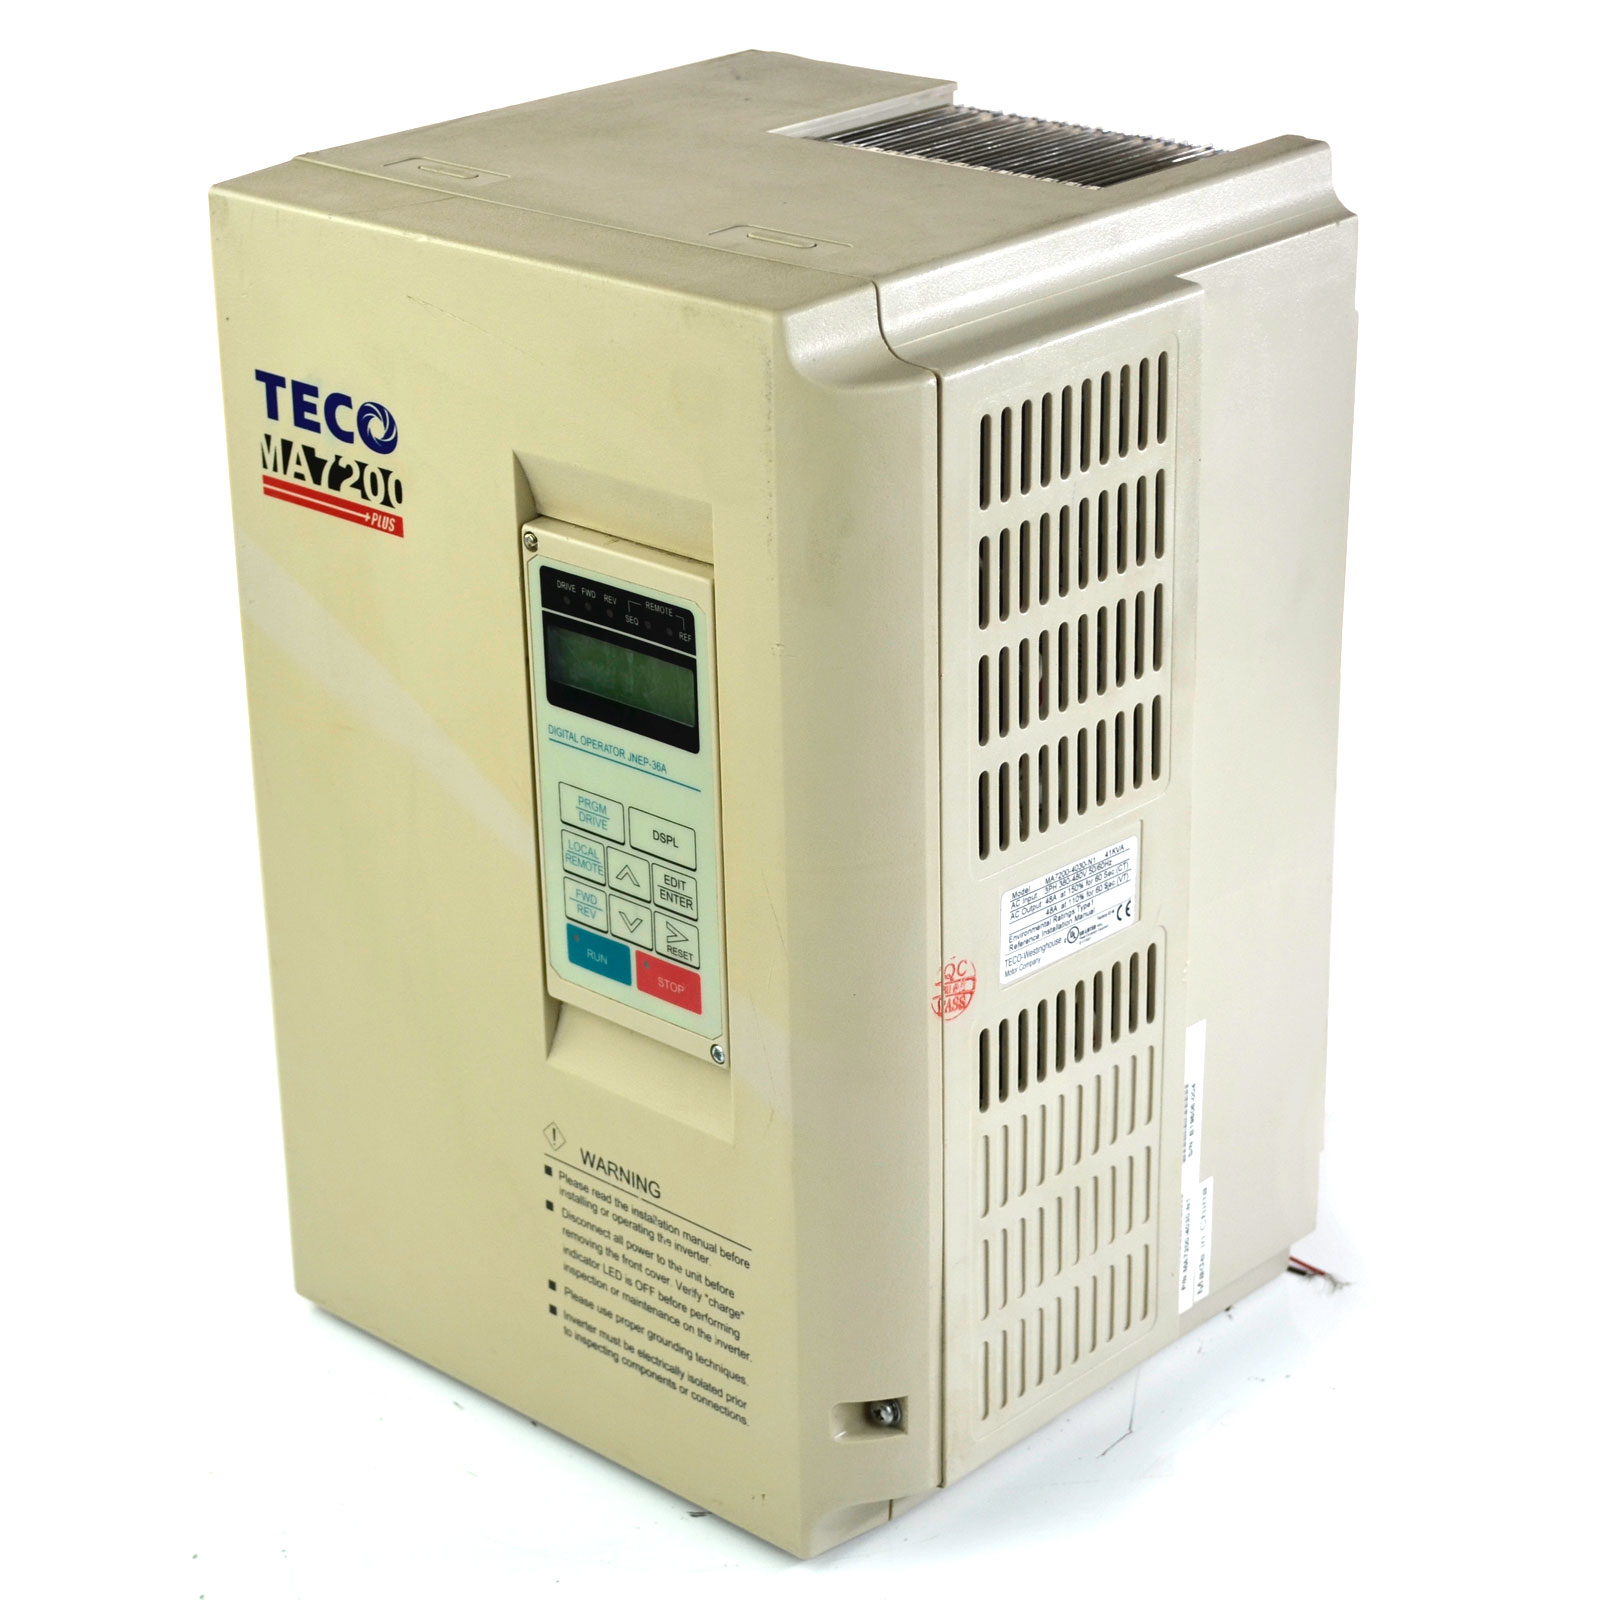 1 Teco-westinghouse Ma7200-4005-n1 Variable Frequency Drive Make OFFER for sale online 